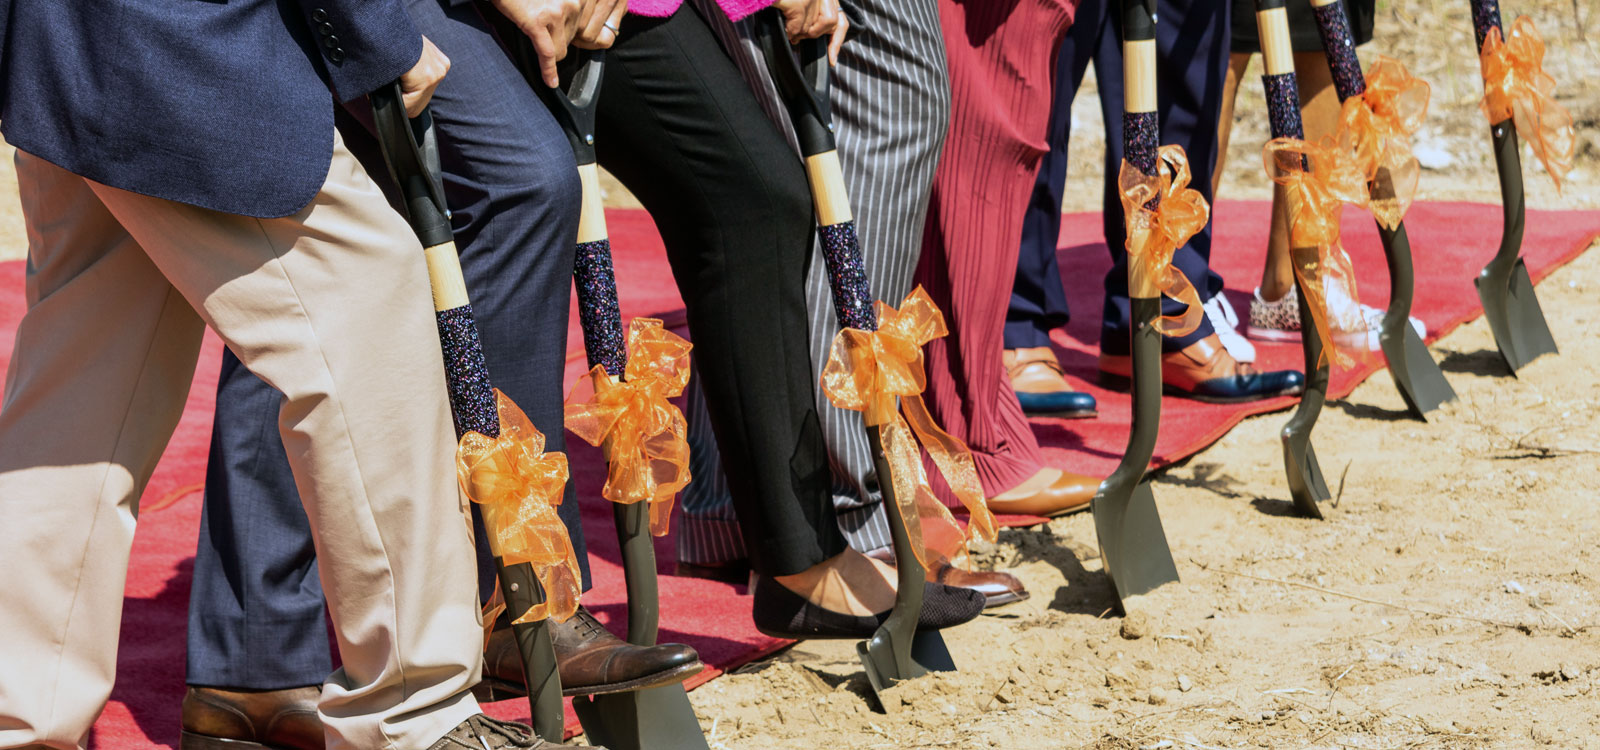 Whirlpool Foundation and Benton Harbor City groundbreaking for multi-family dwelling in 2021